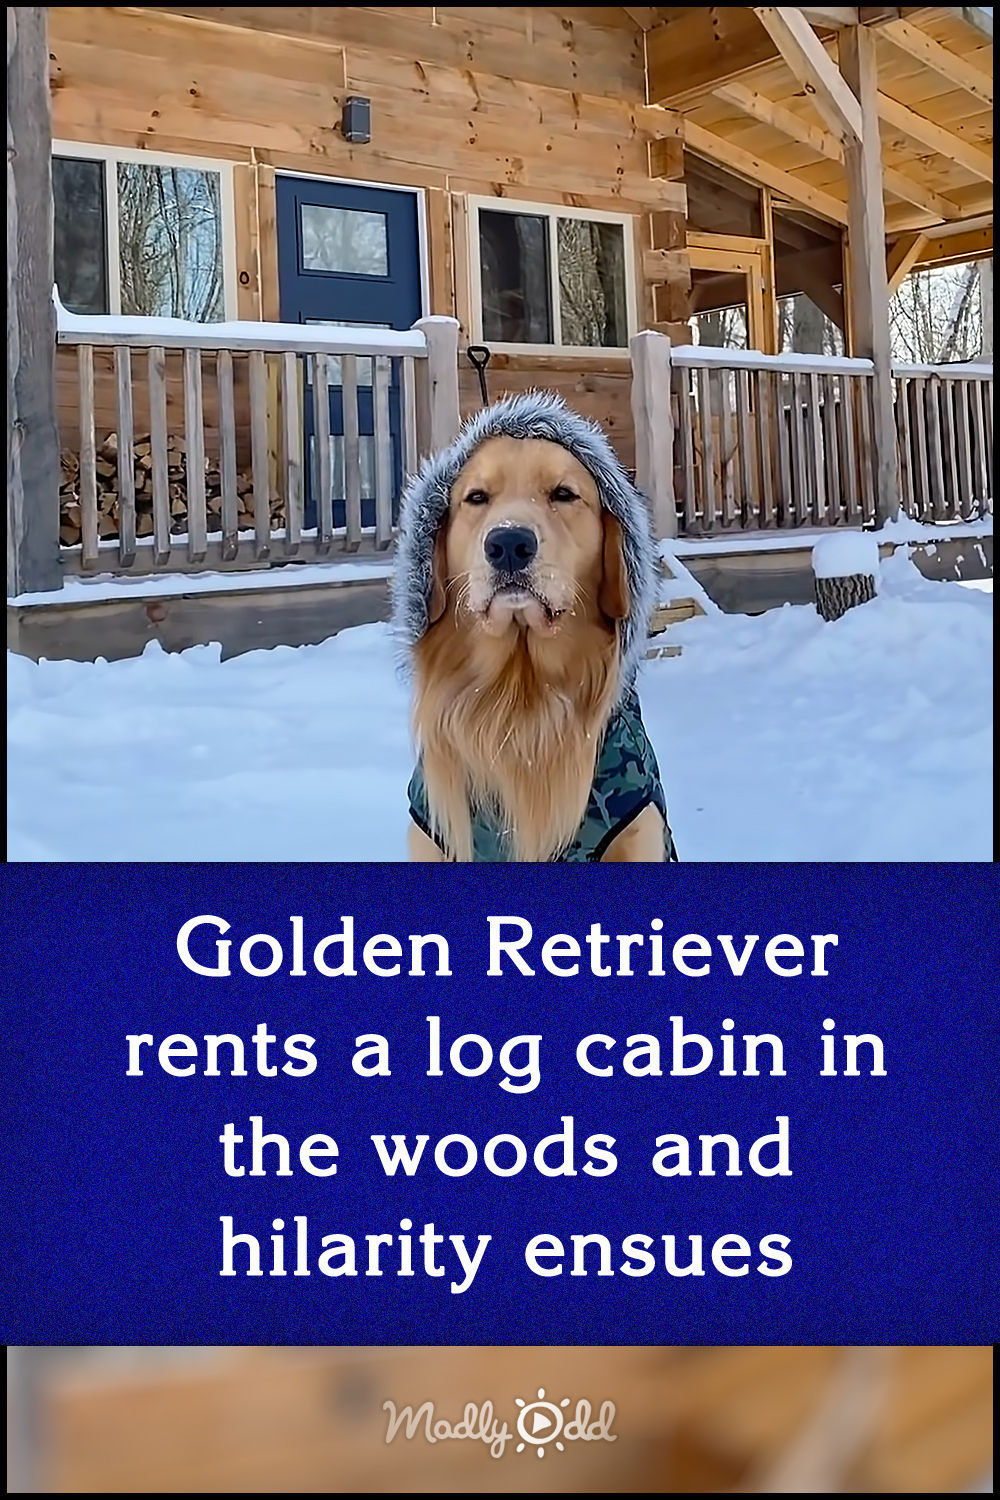 Golden Retriever rents a log cabin in the woods and hilarity ensues